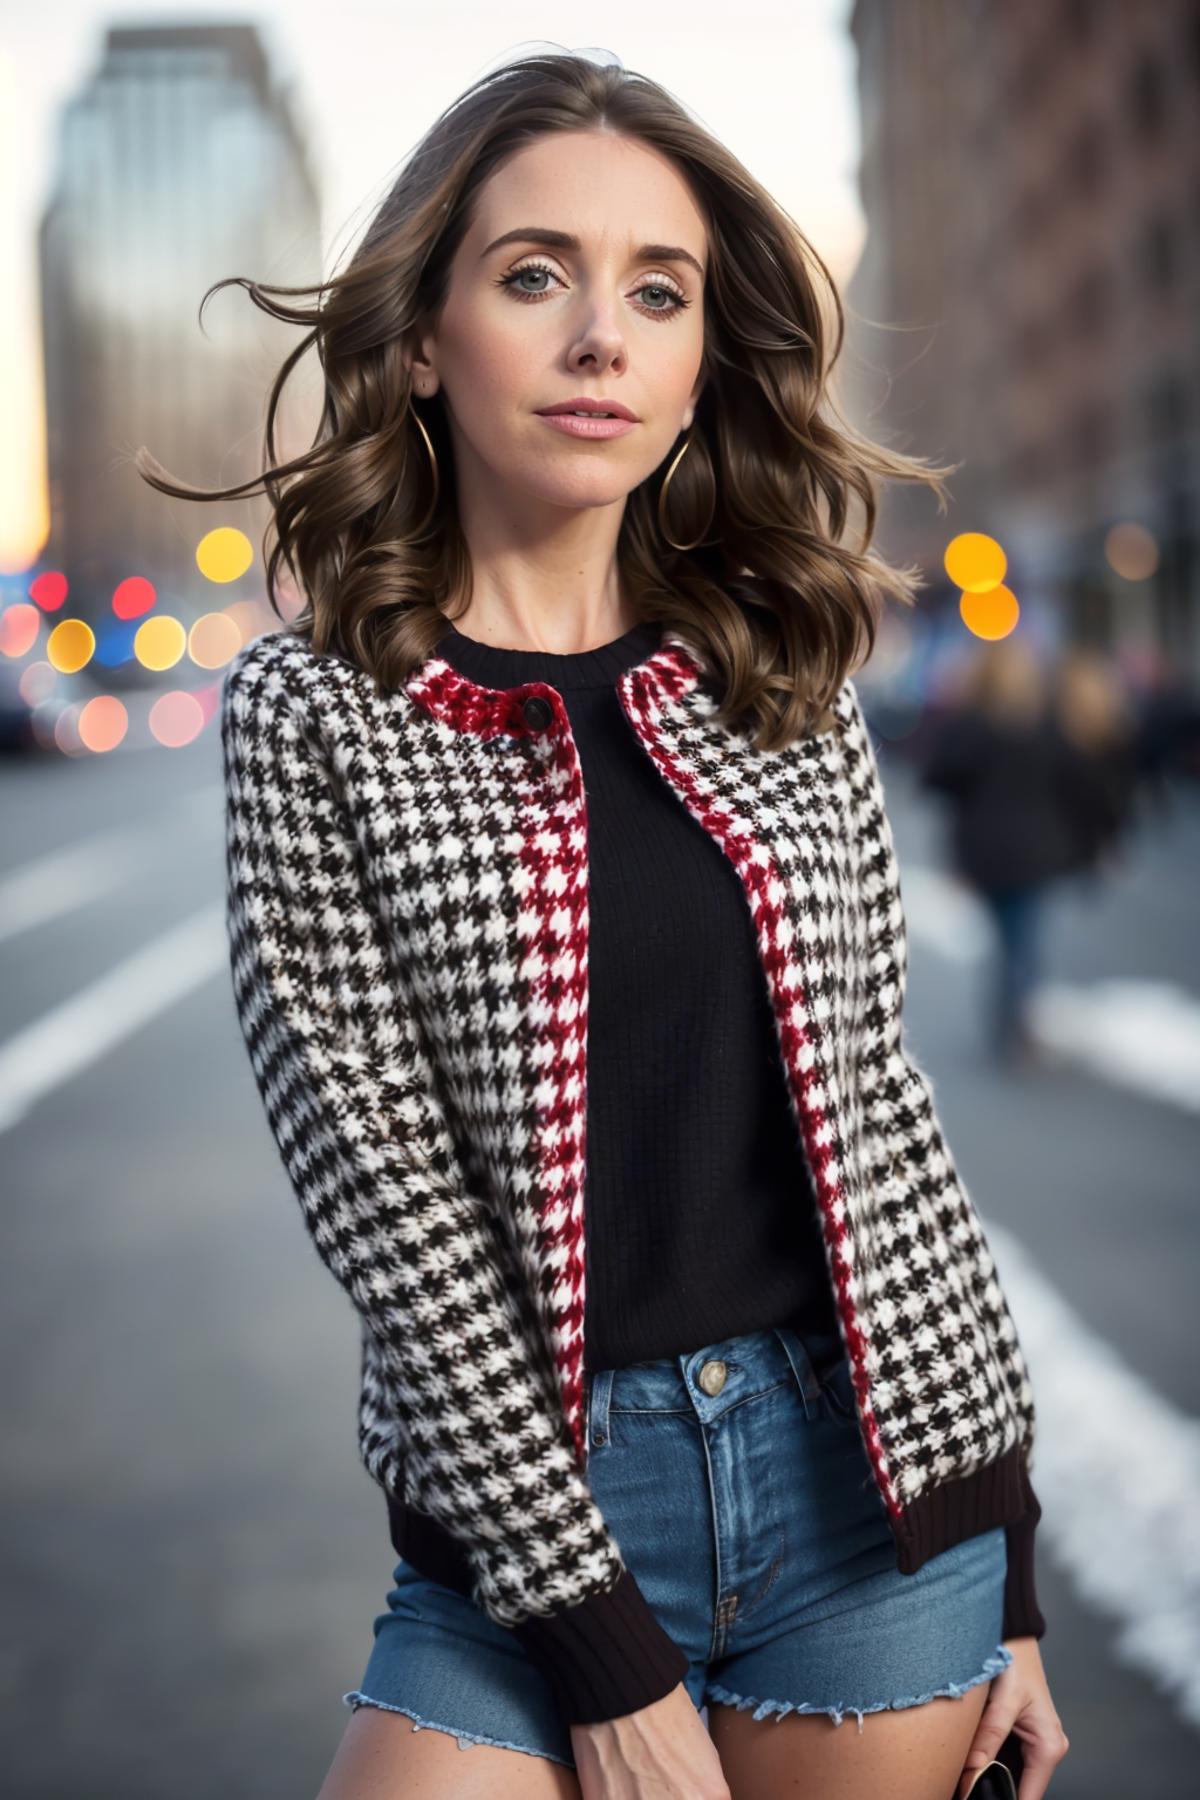 Alison Brie (gb) image by gregariousbaboon